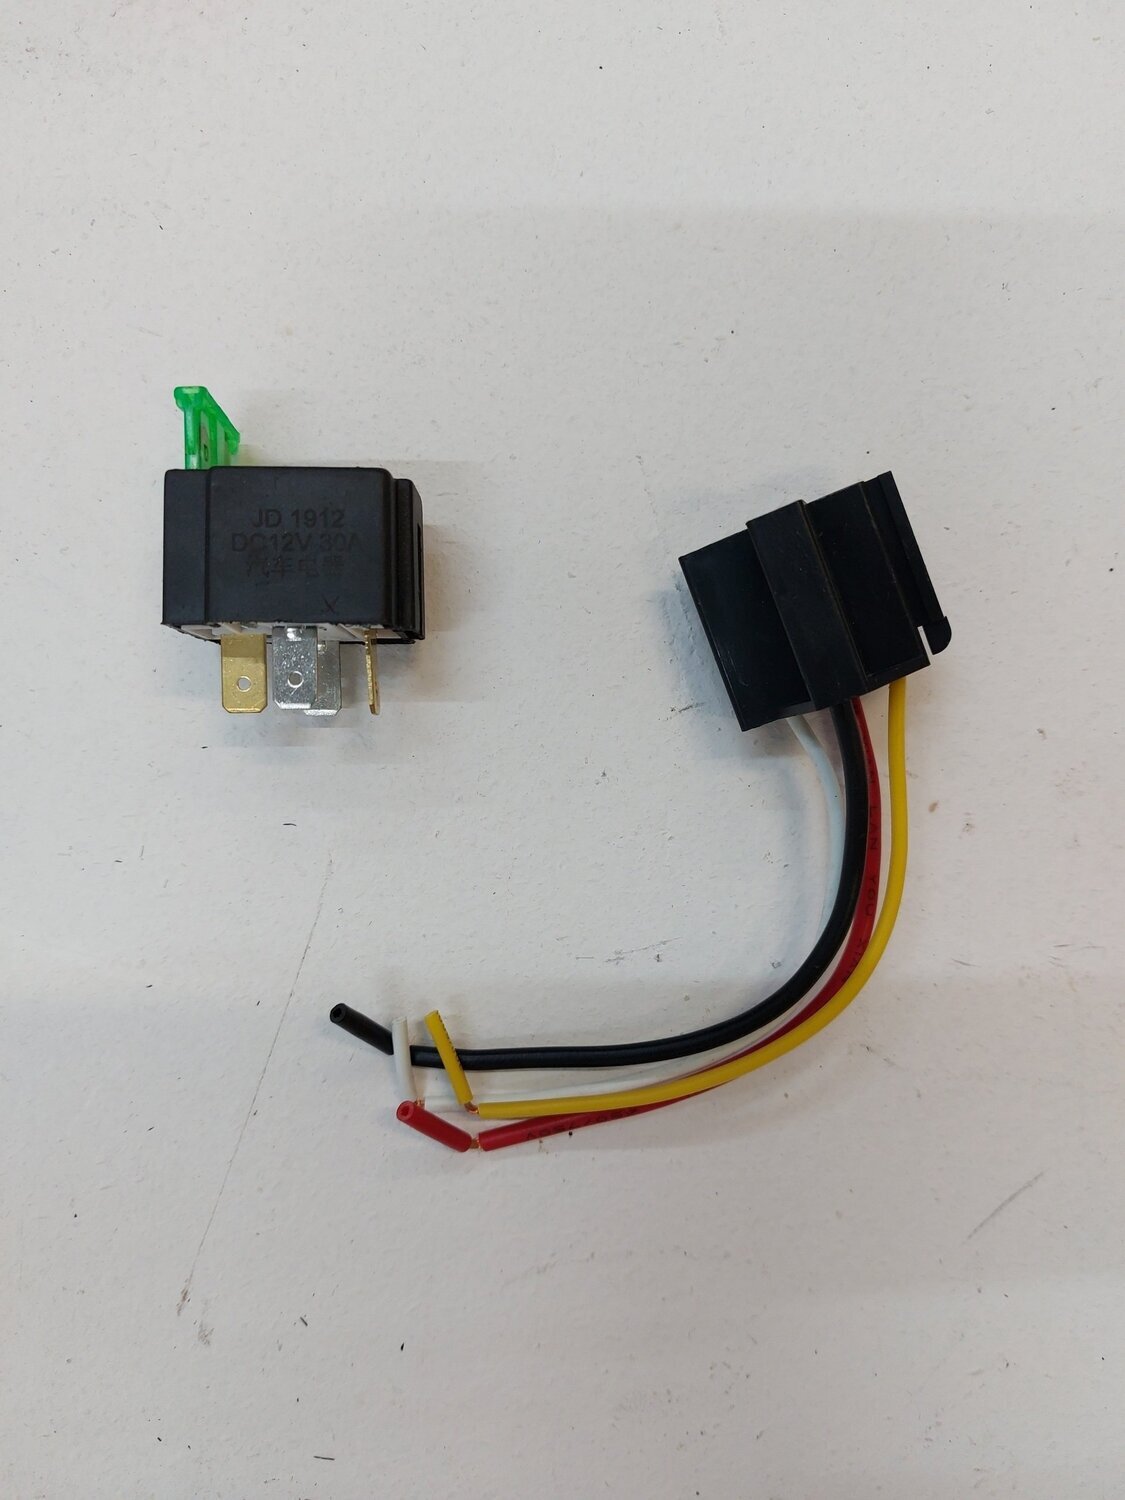 chargecooler pump relay and base